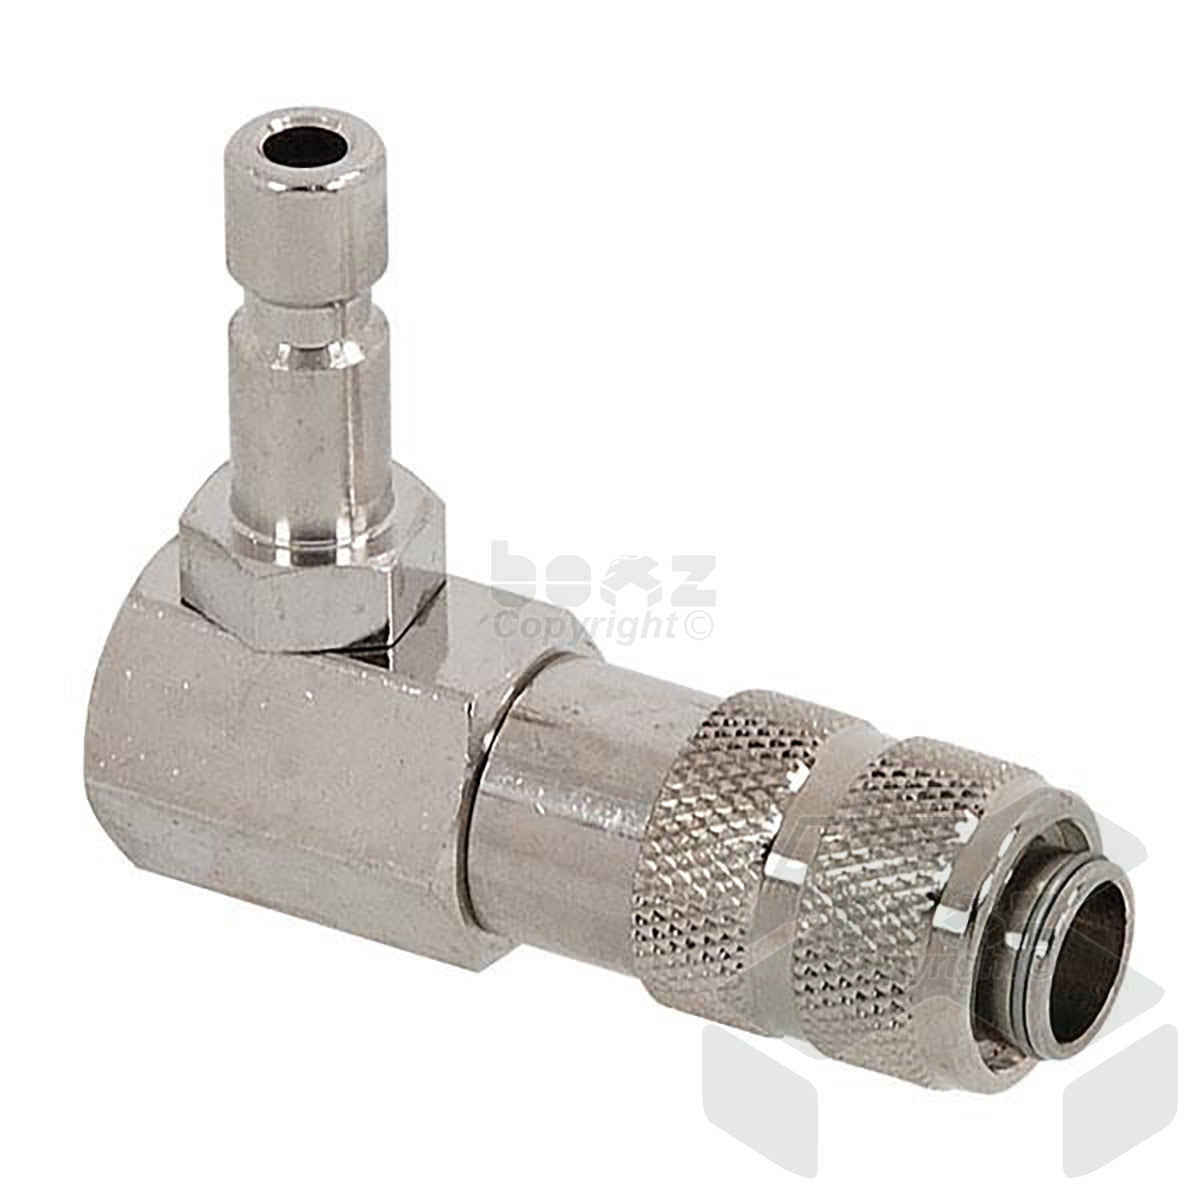 Neilsen 90 Degree Connector For Radiator Adapters